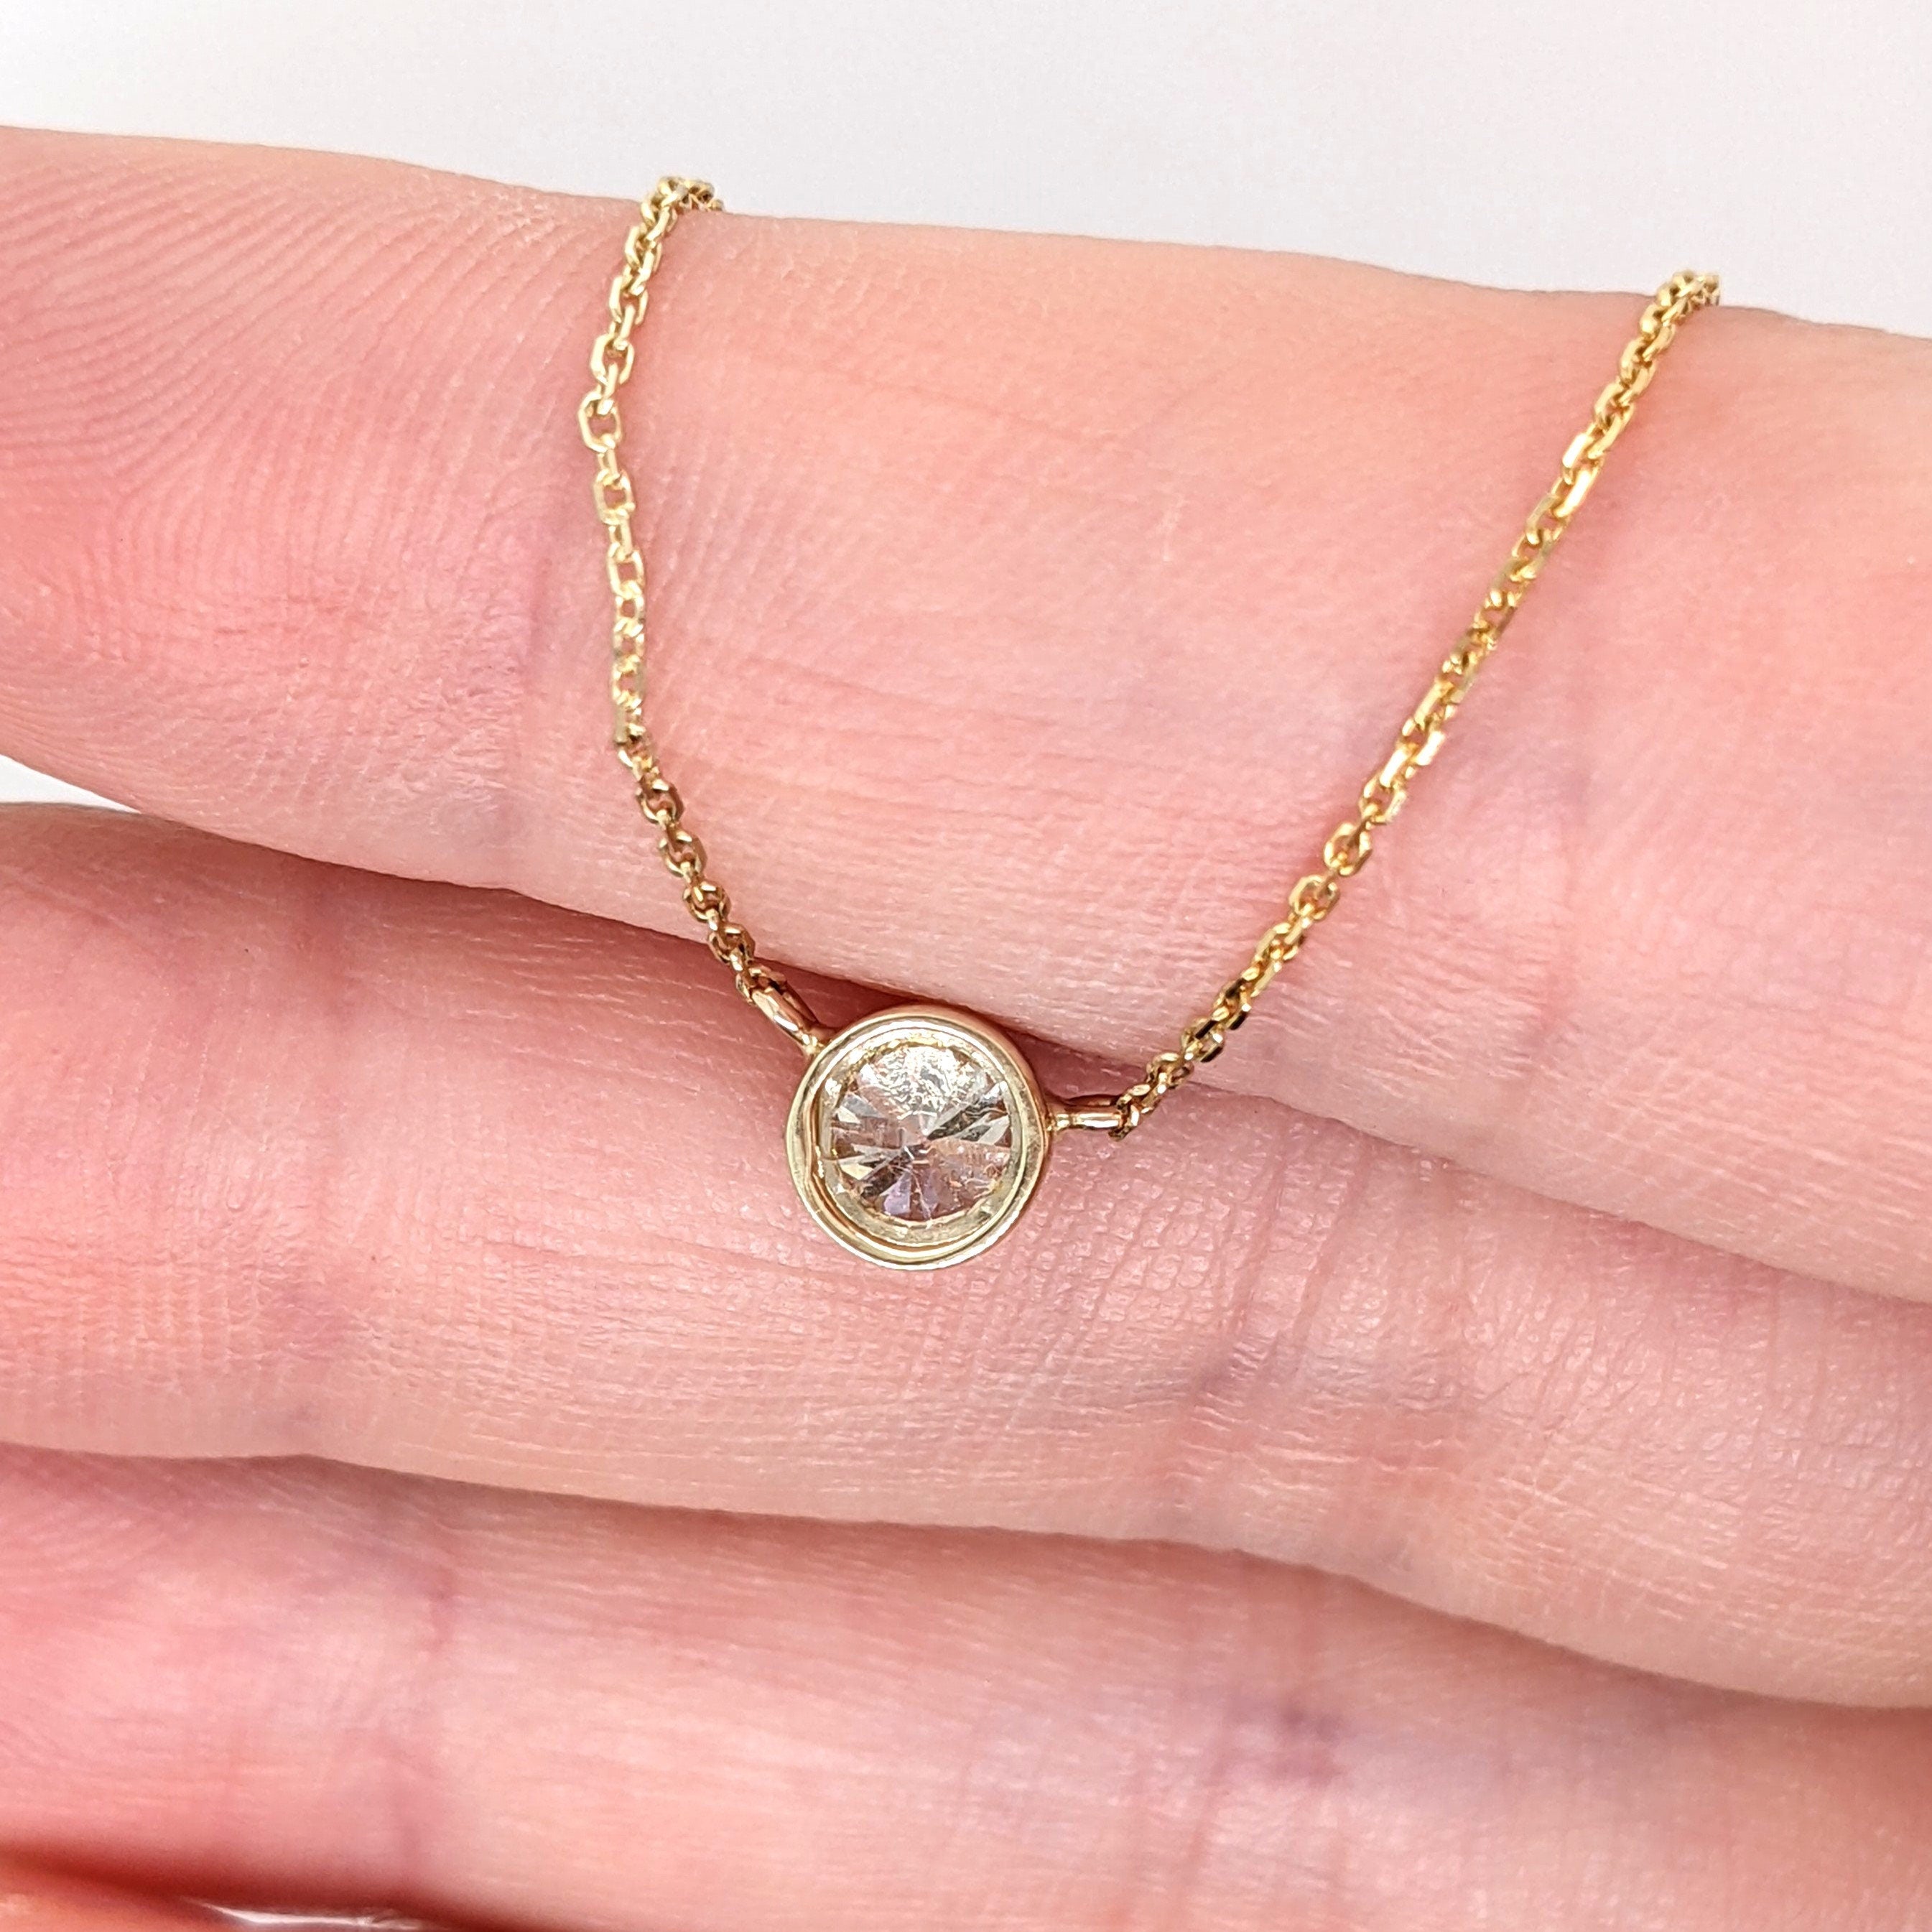 Solitaire Natural Diamond Necklace in Solid 14k White, Yellow or Rose Gold | Round Cut 5mm | Bezel Set | April Birthstone | Minimalist